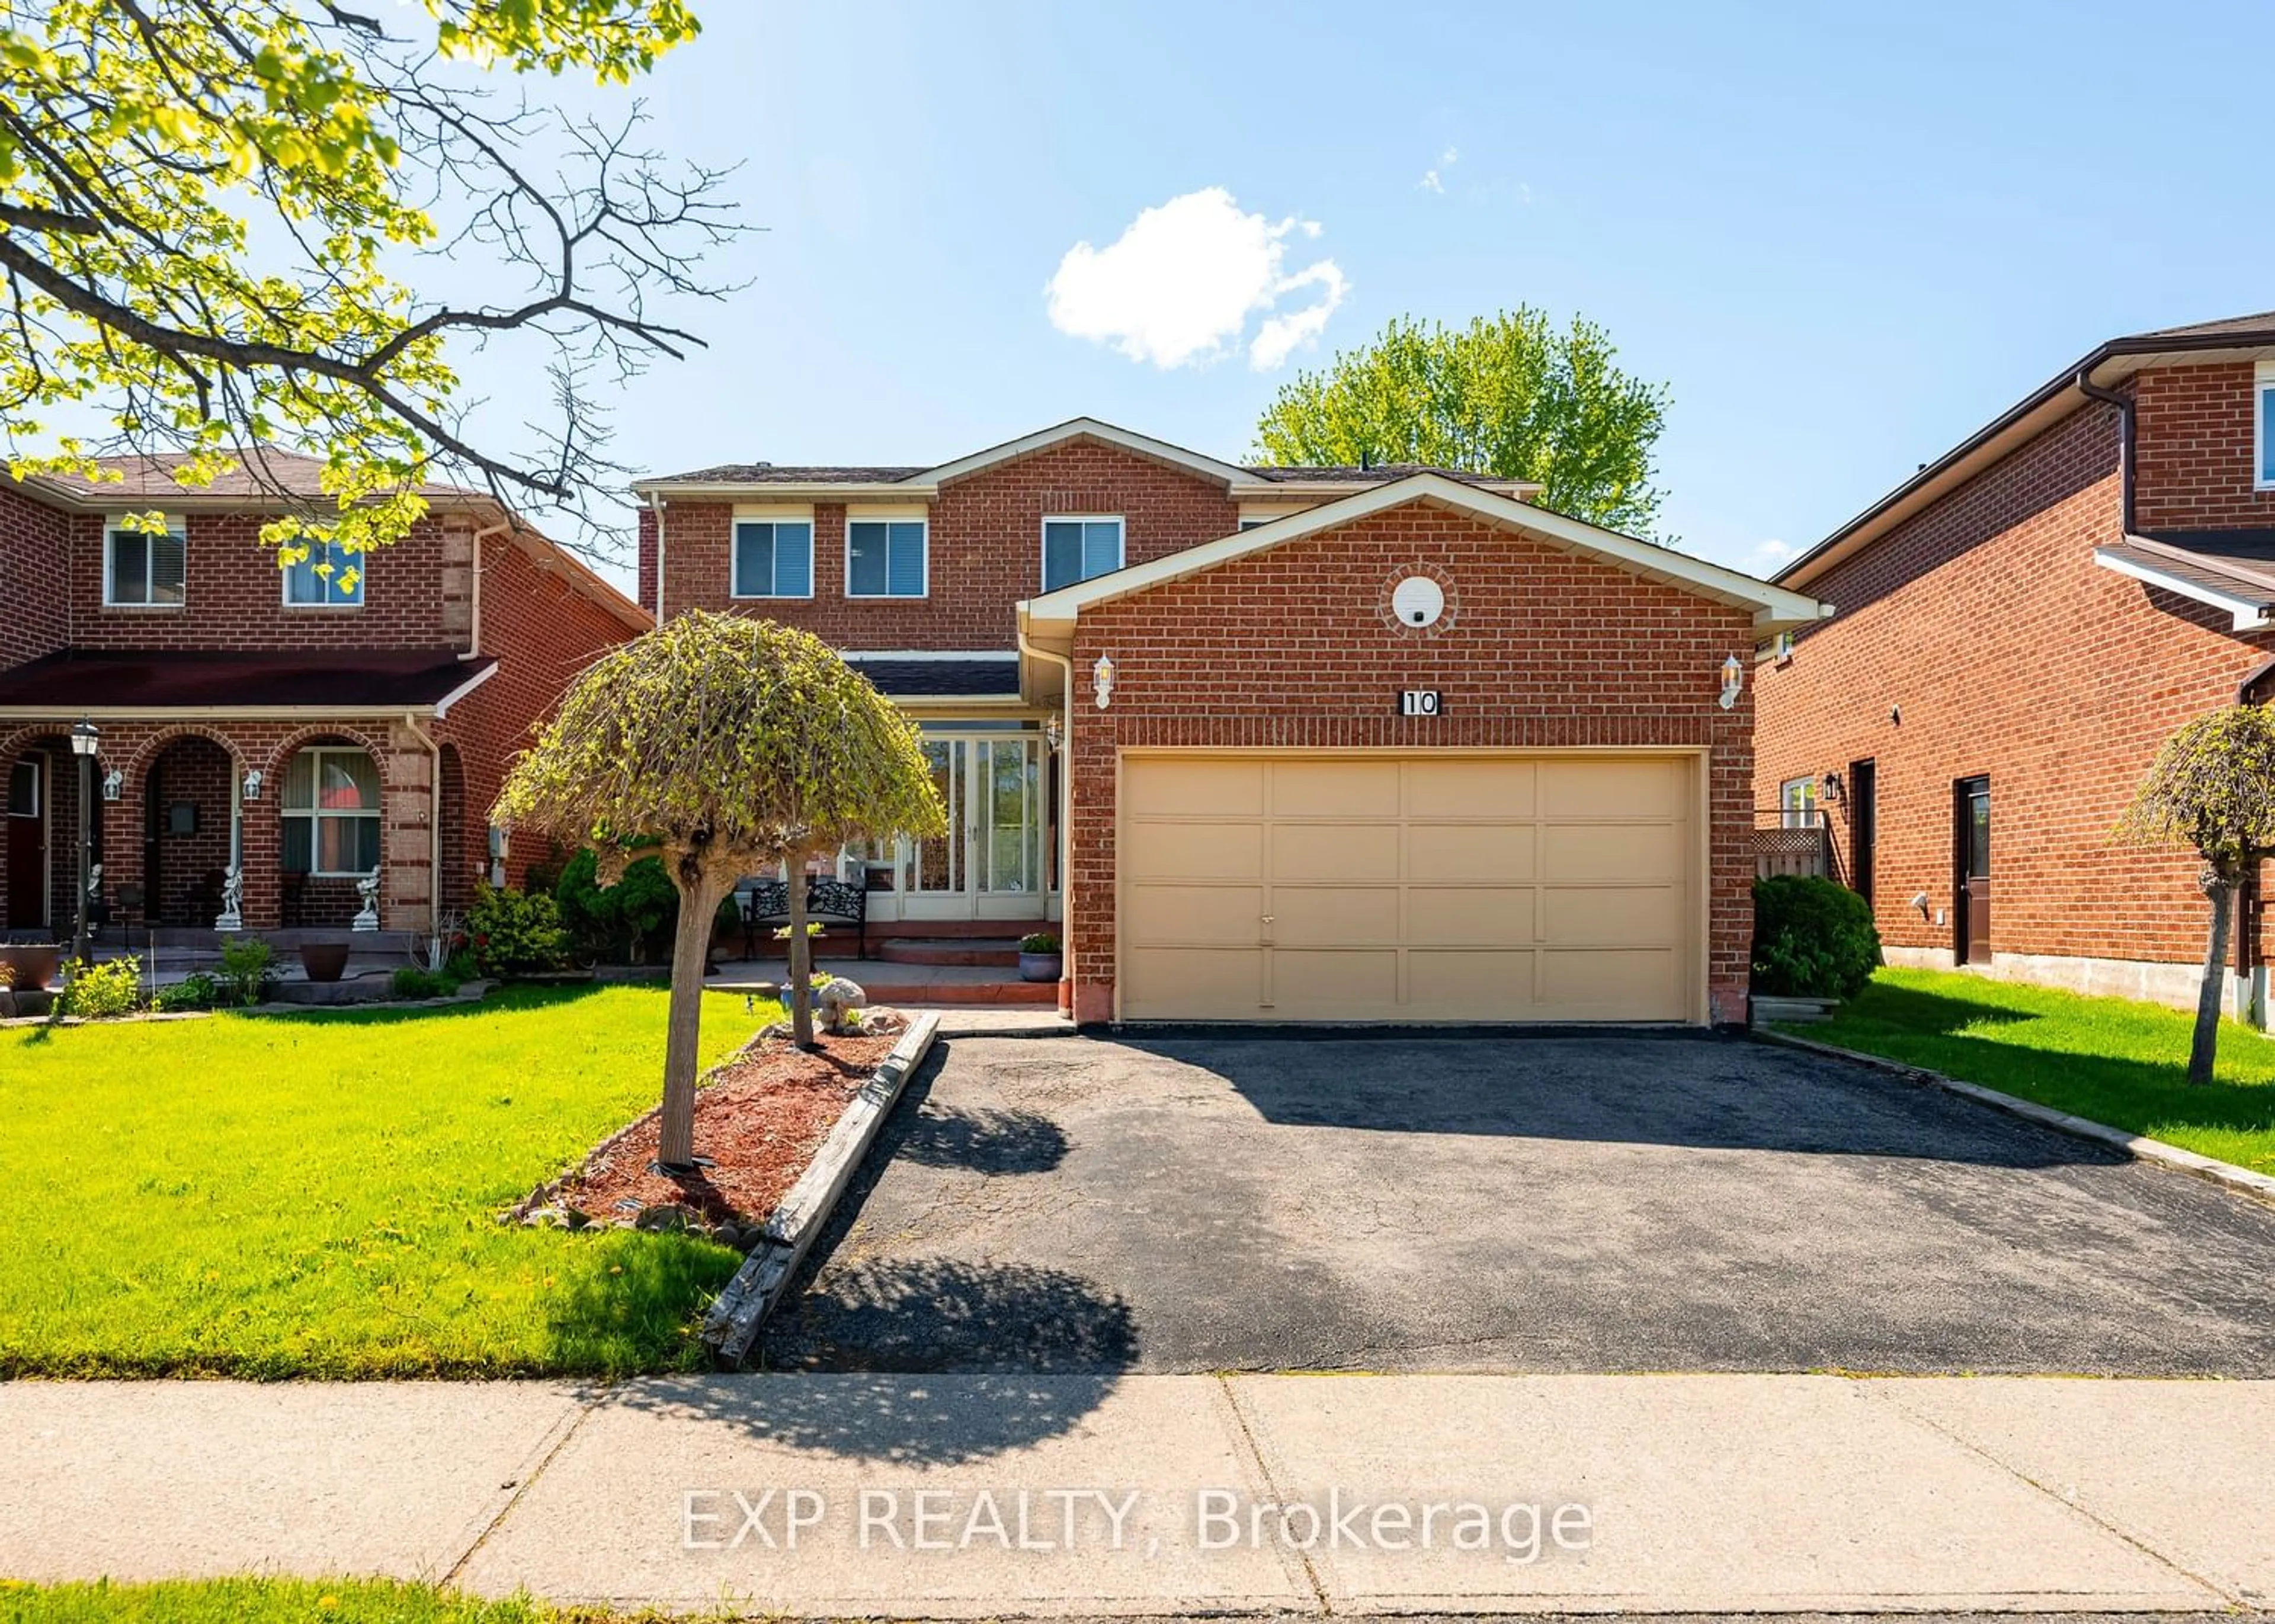 Home with brick exterior material for 10 Ruth Ave, Brampton Ontario L6Z 3X4